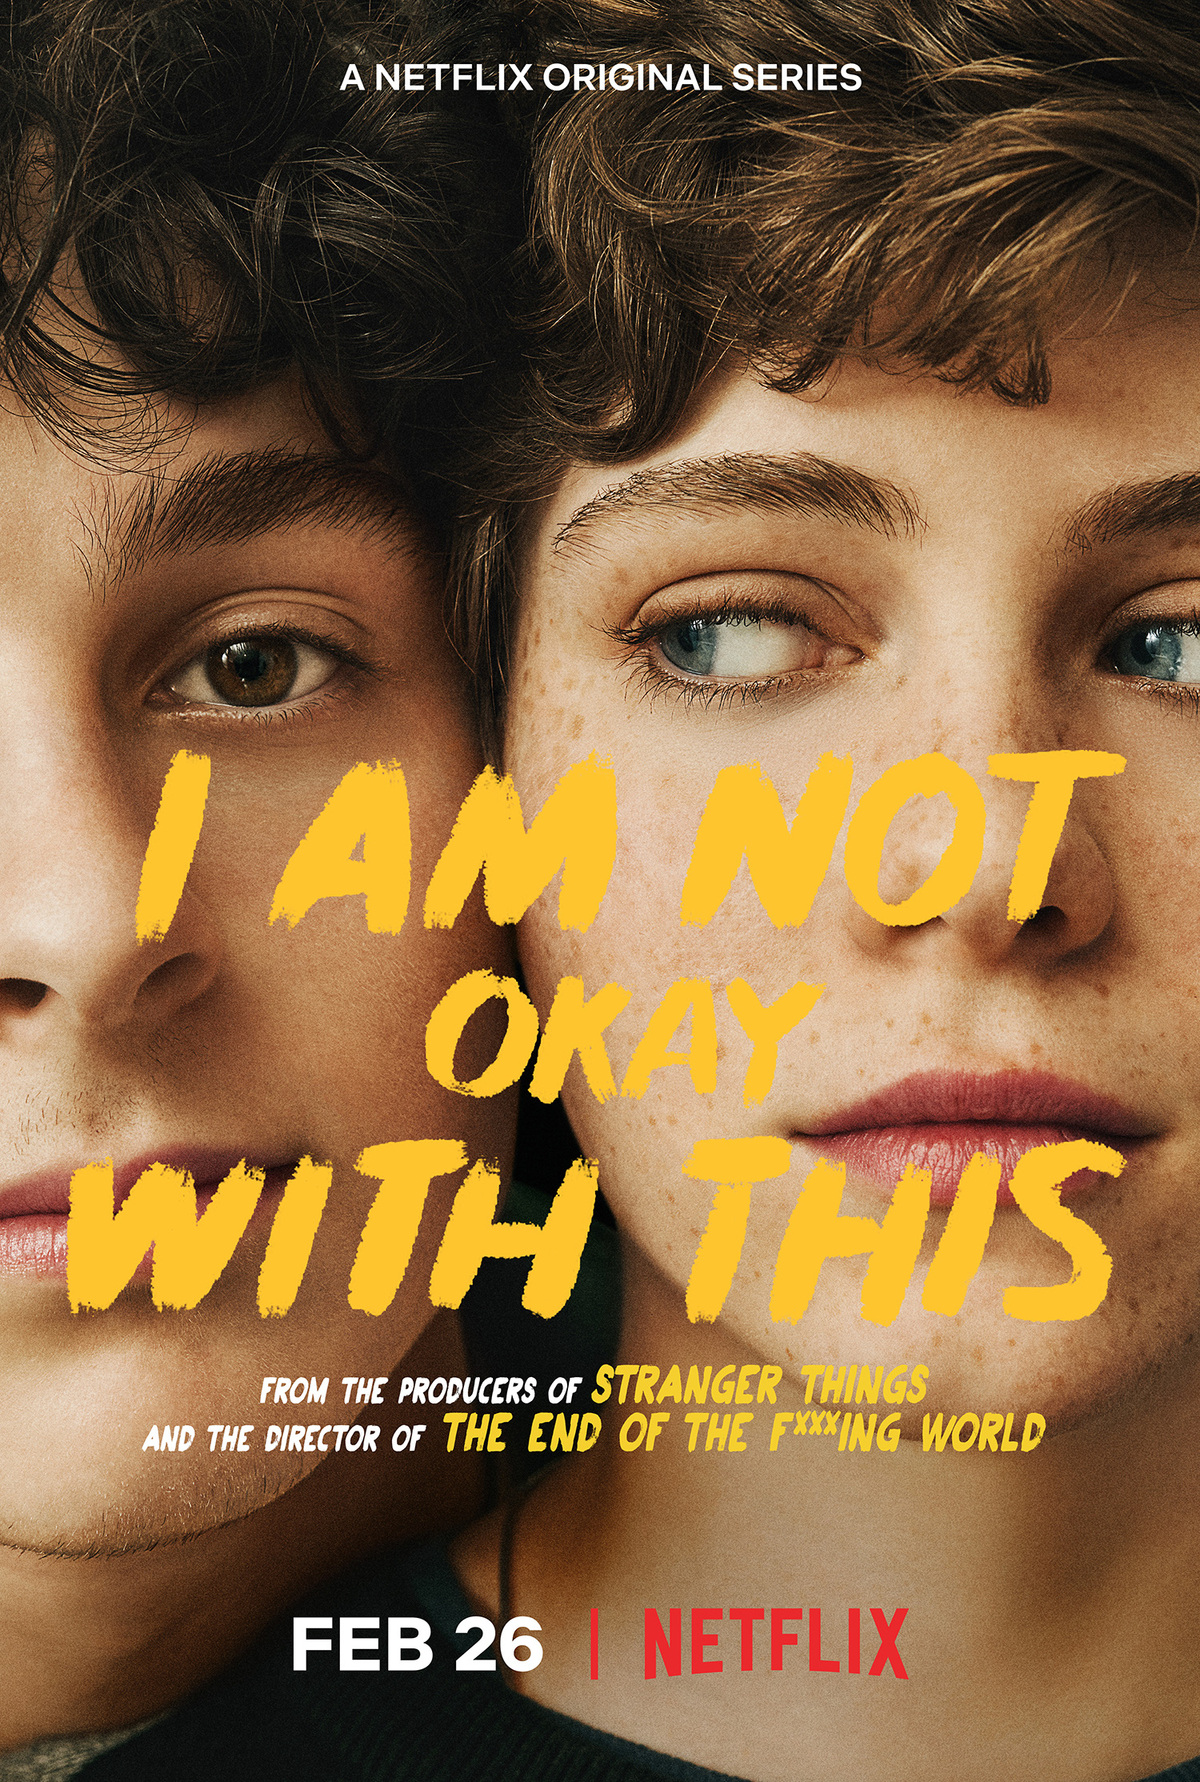 Movie poster for Netflix’s "I Am Not Okay With This"